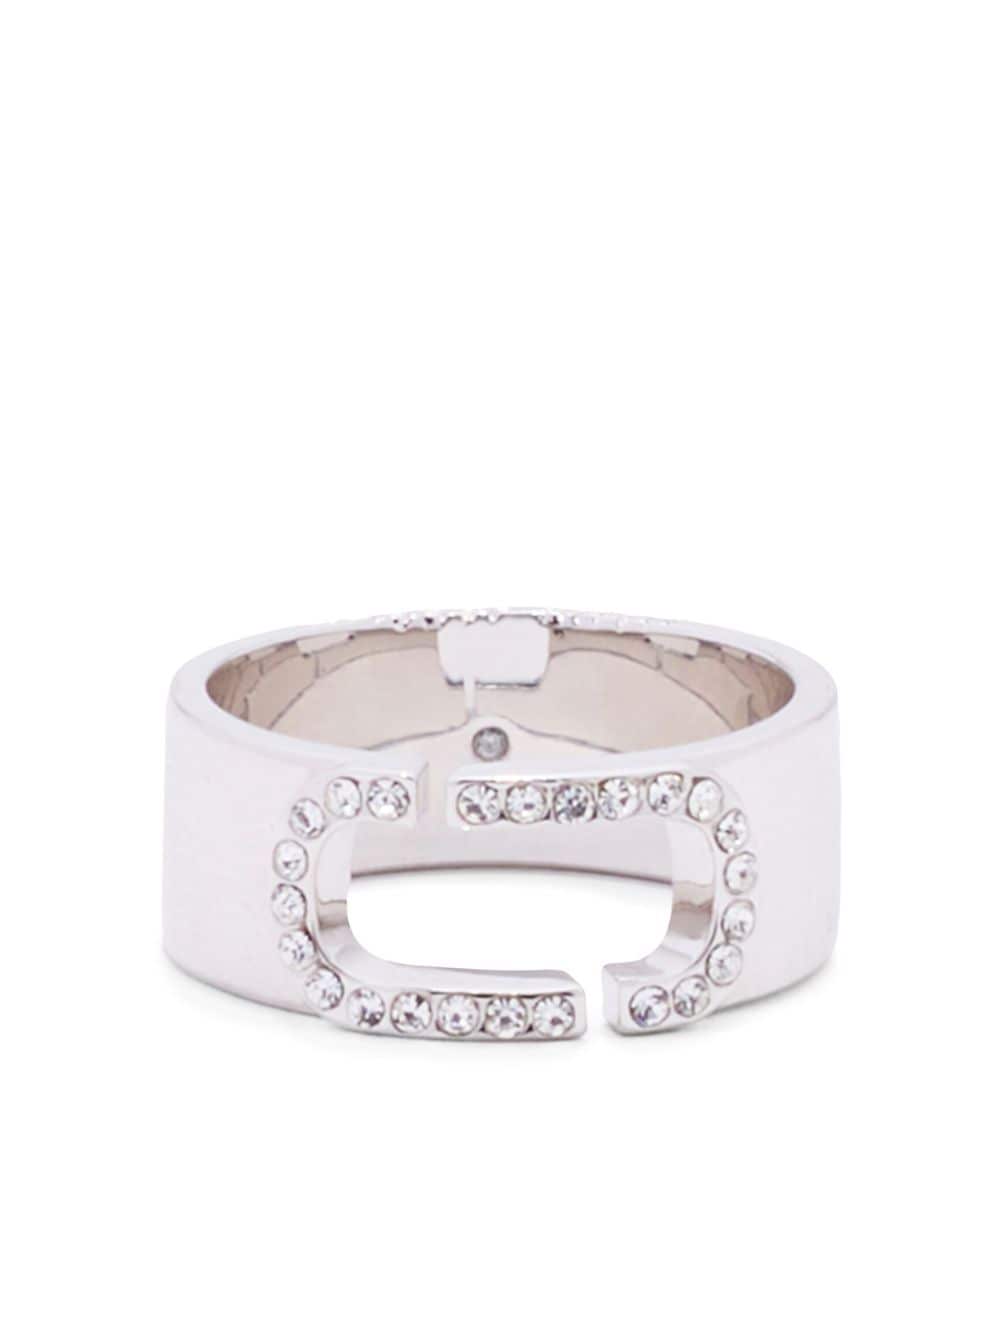 Marc Jacobs pave band ring - Silver von Marc Jacobs